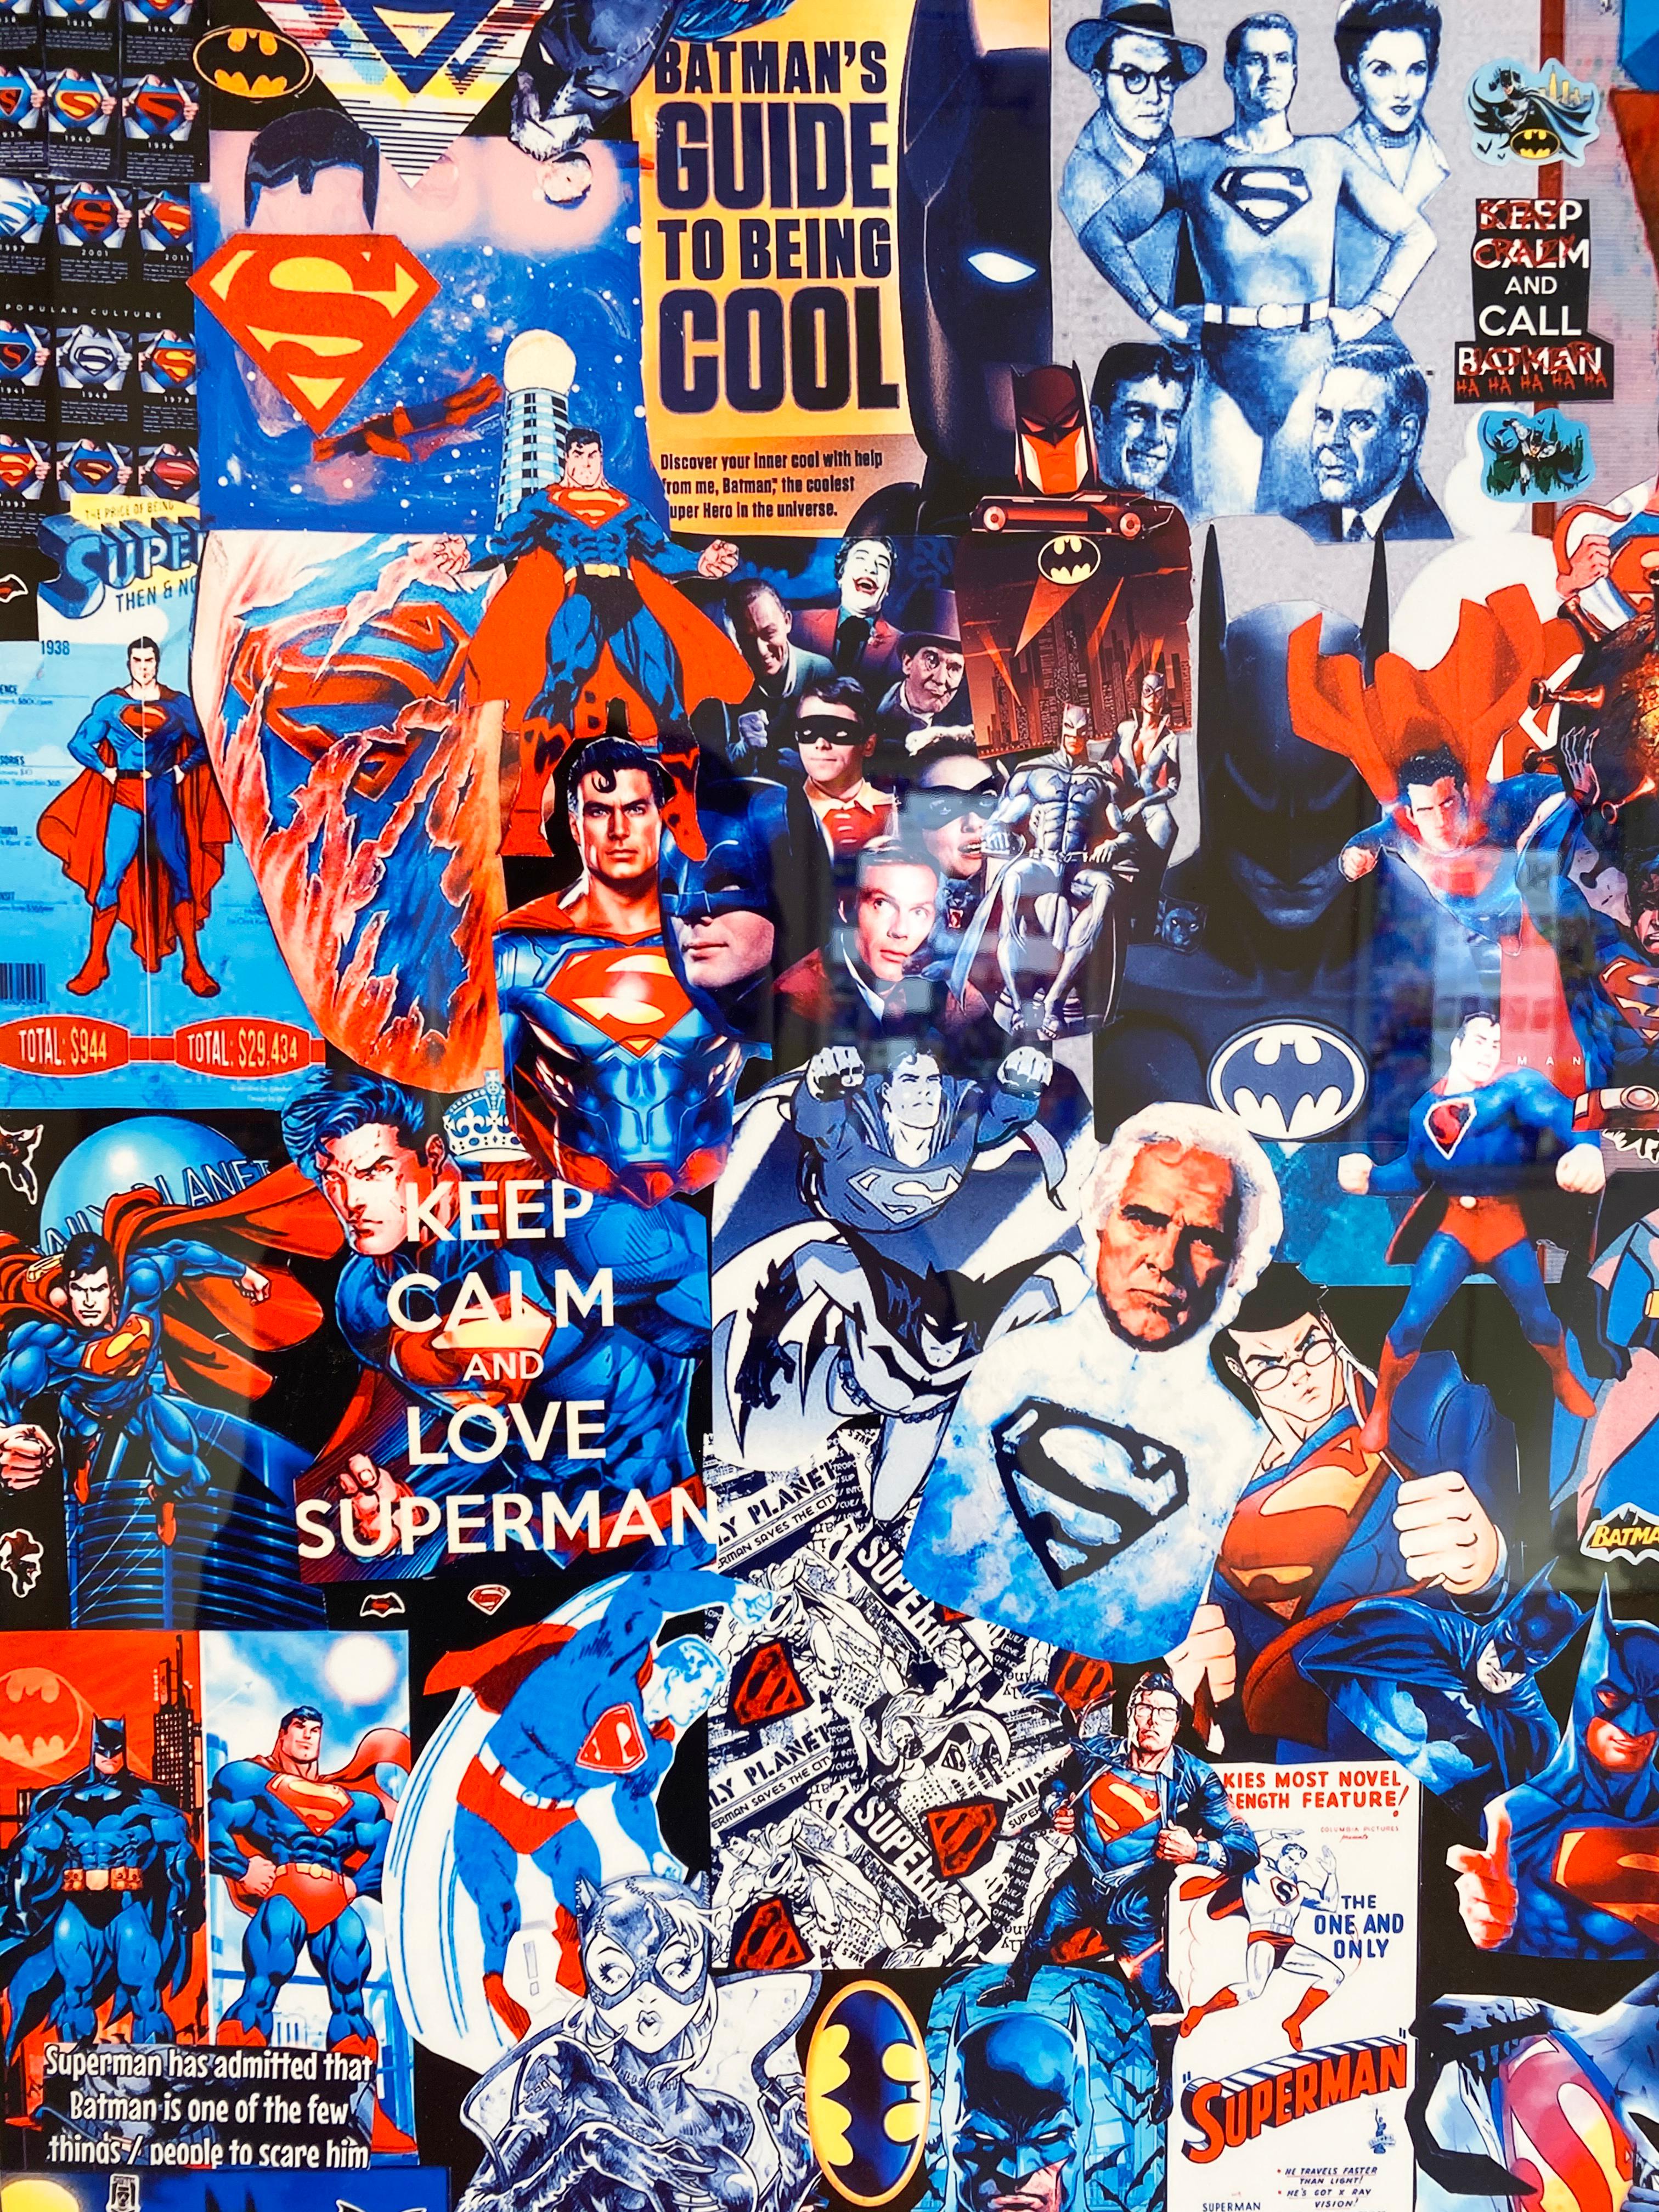 'Superman, Batman, Coronavirus' by DJ Leon, 2020. 48 x 28 in. A dye-sublimation print on aluminum that is saturated in colors of reds, blues, and whites. The image incorporates, appropriates, and combines found images of Superman and Batman that